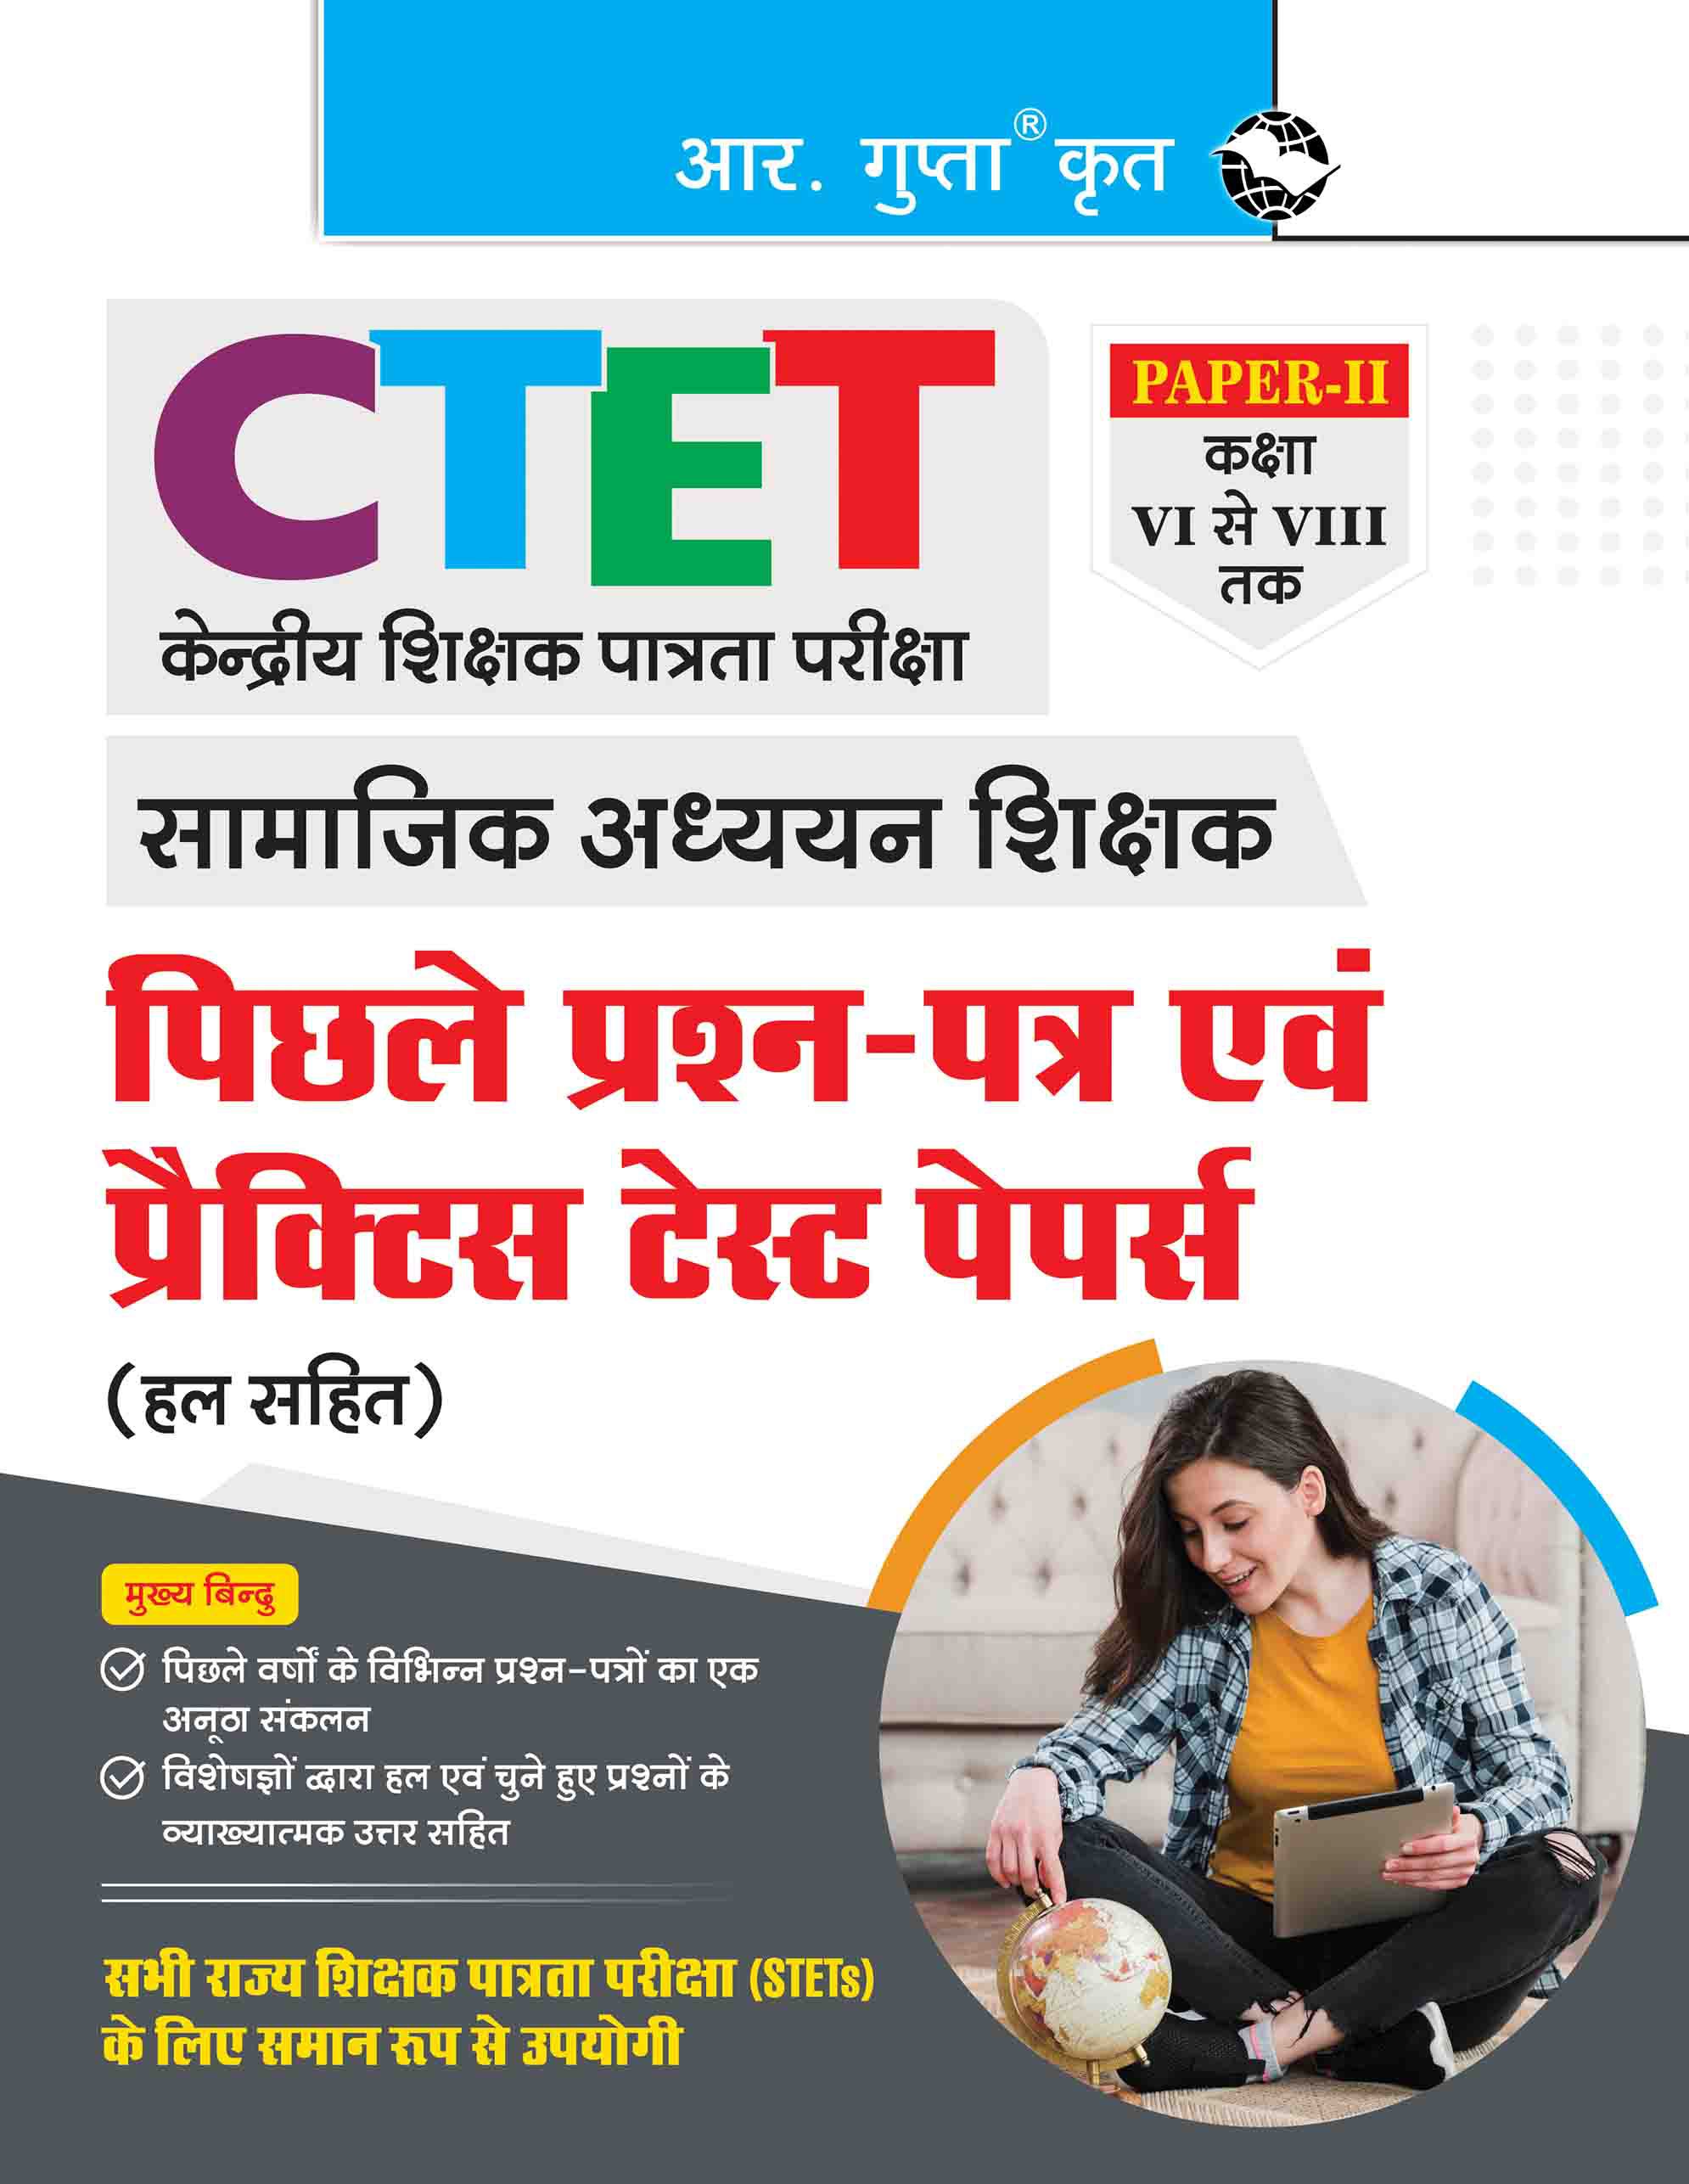     			CTET : Paper-II (Class VI to VIII) Social Studies Teacher Posts - Previous Years' Papers & Practice Test Papers (Solved)